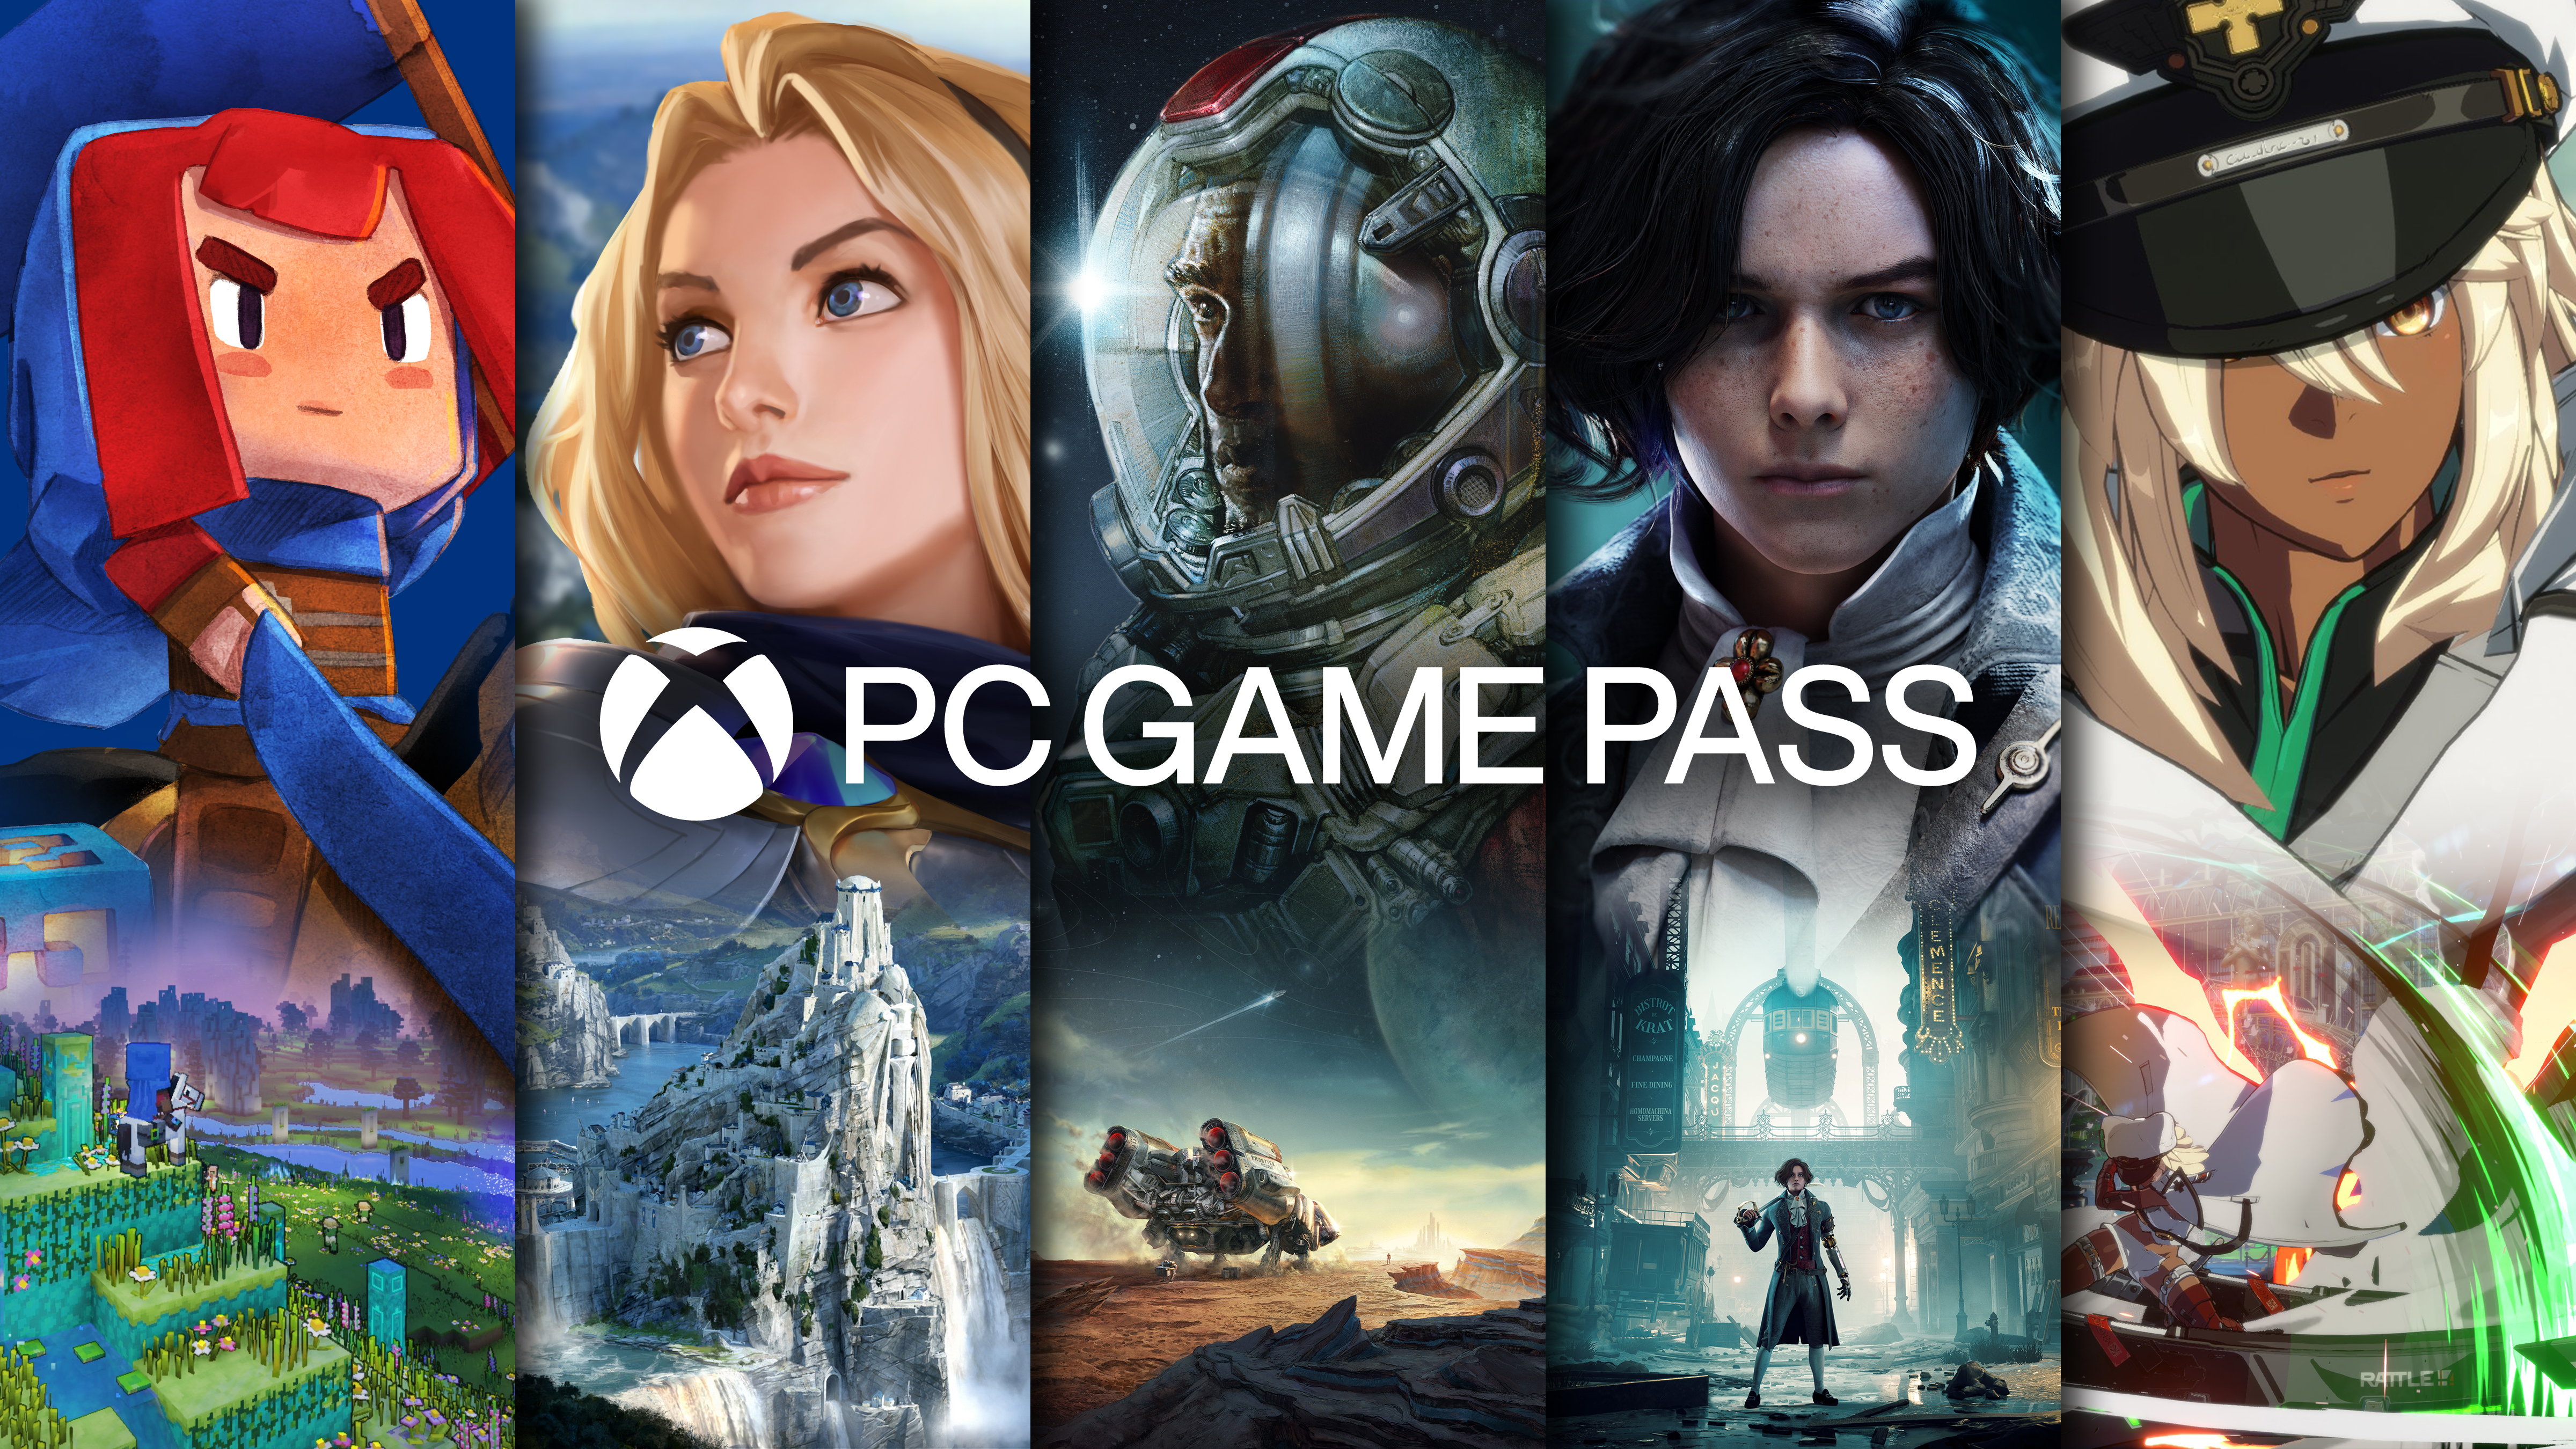 Microsoft Explains Xbox Game Pass For PC, Selling Games